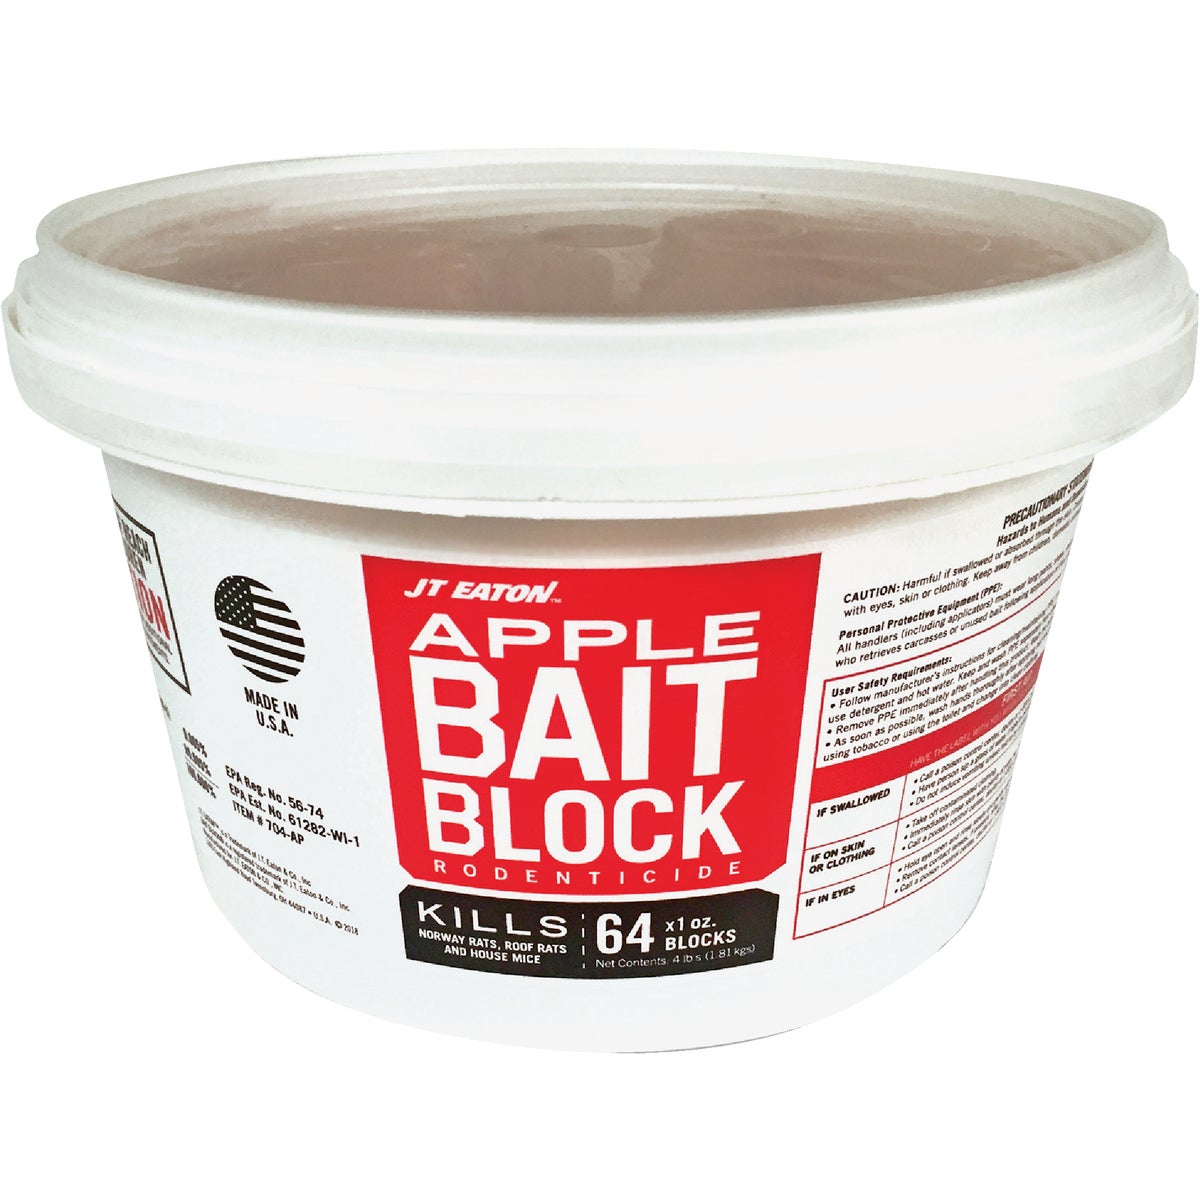 Item 705688, Apple flavored bait block. Features a tamper evident resealable pail.